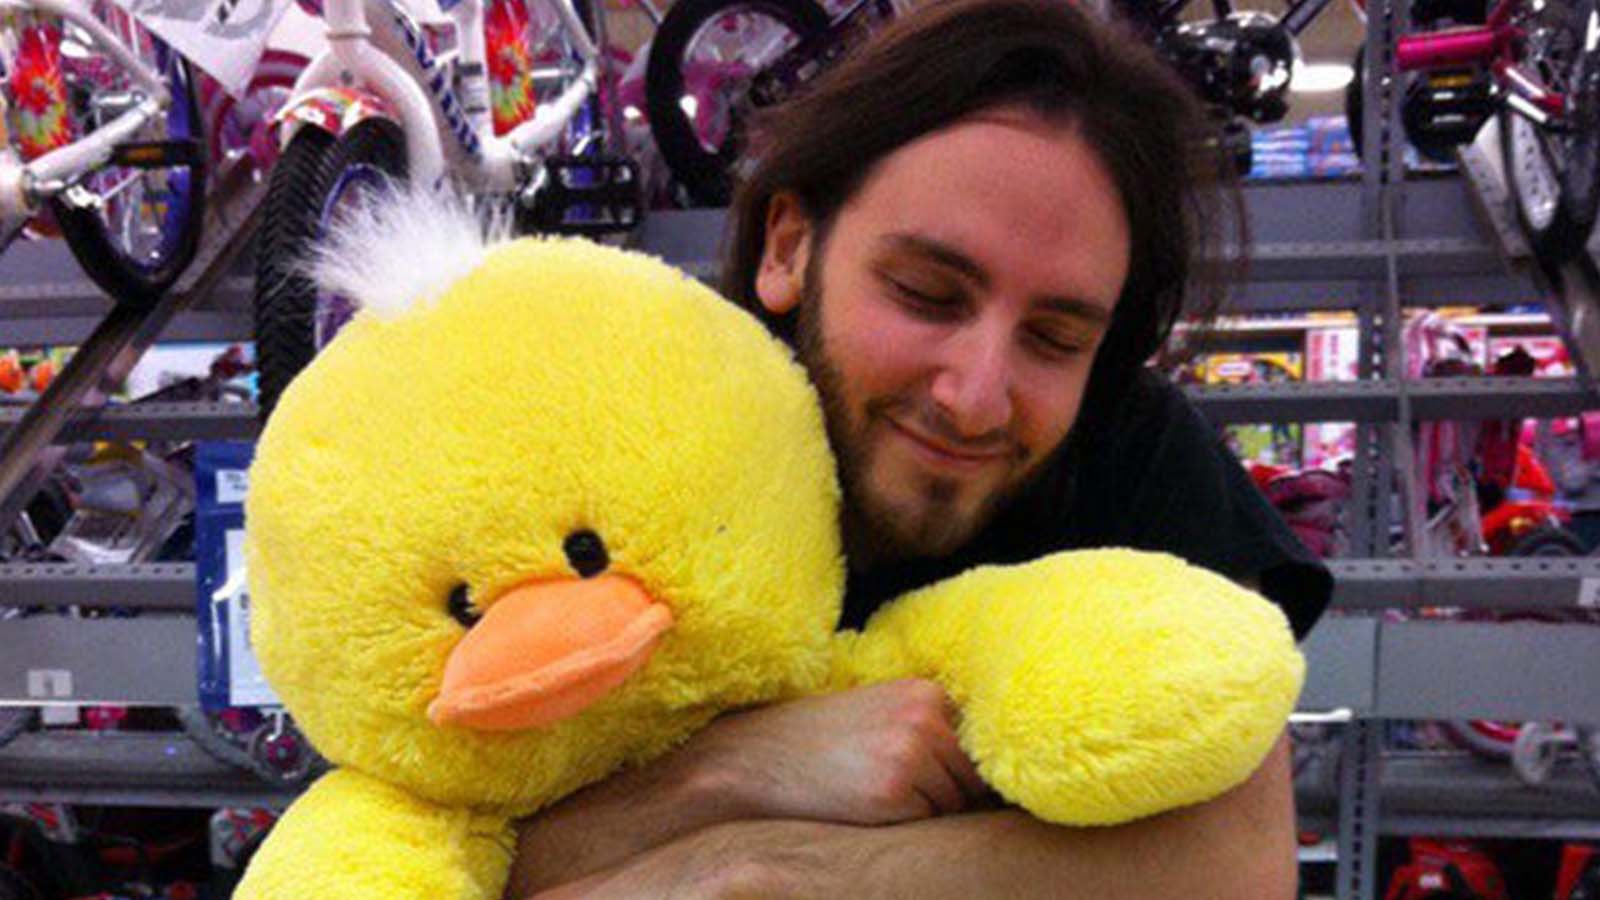 reckful holding his duck at the store